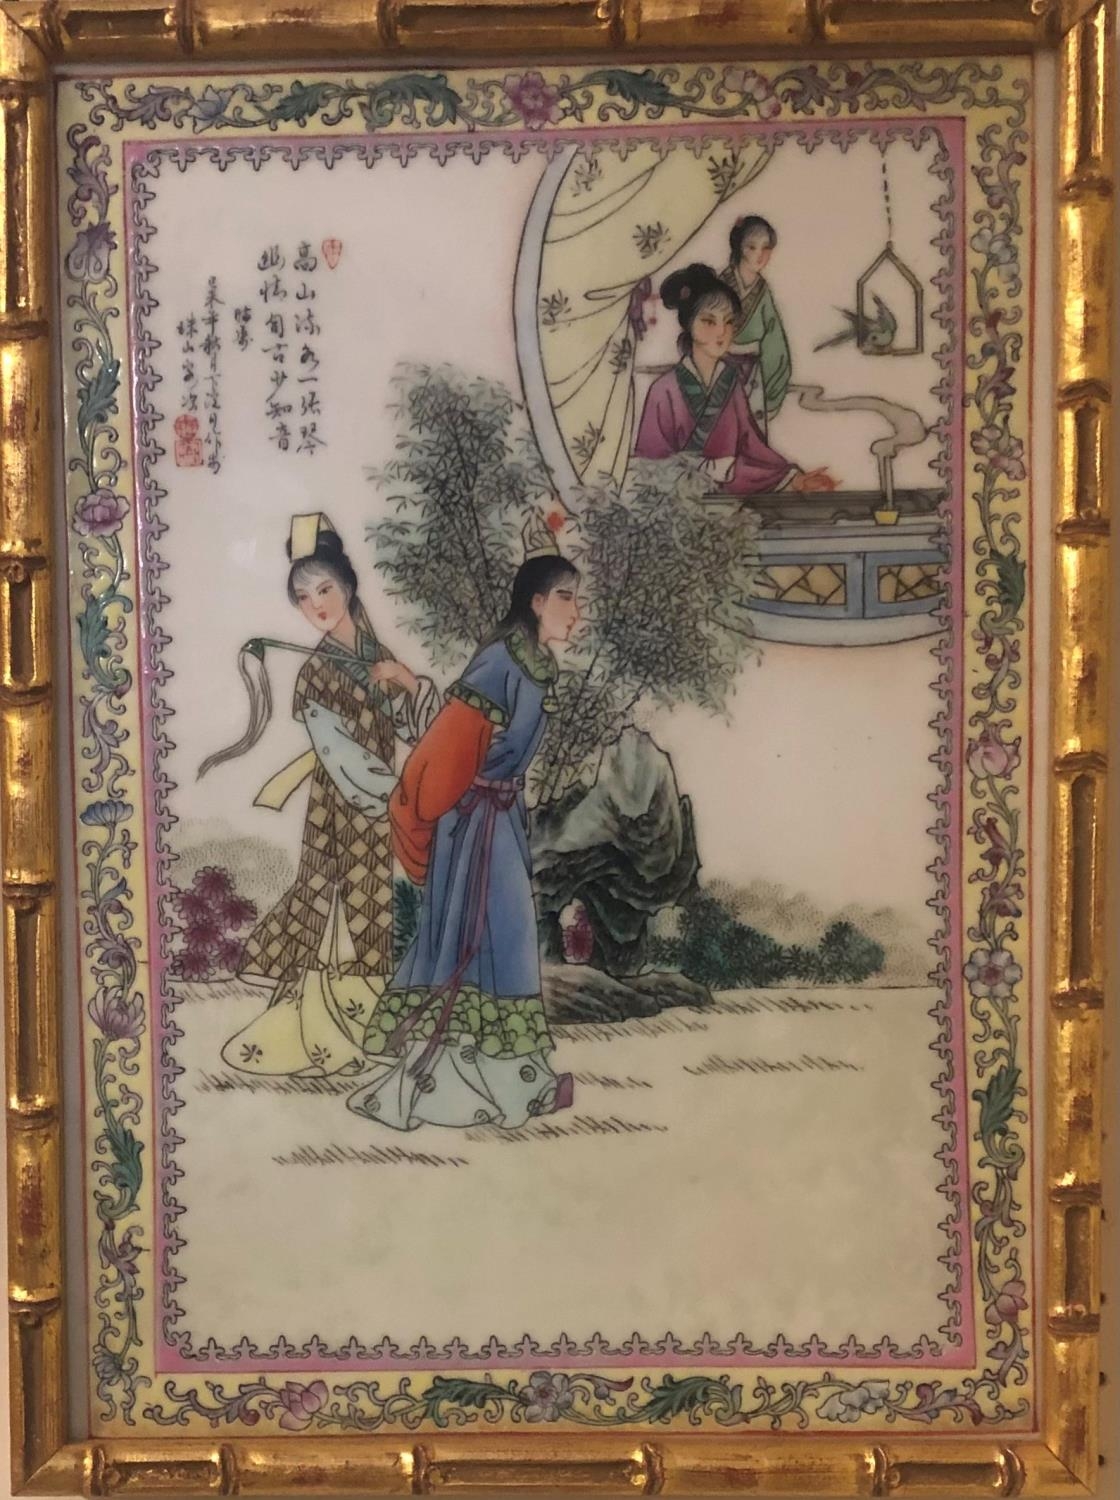 A CHINESE PORCELAIN PLAQUE Decorated with a courting couple in garden setting, with script, in a